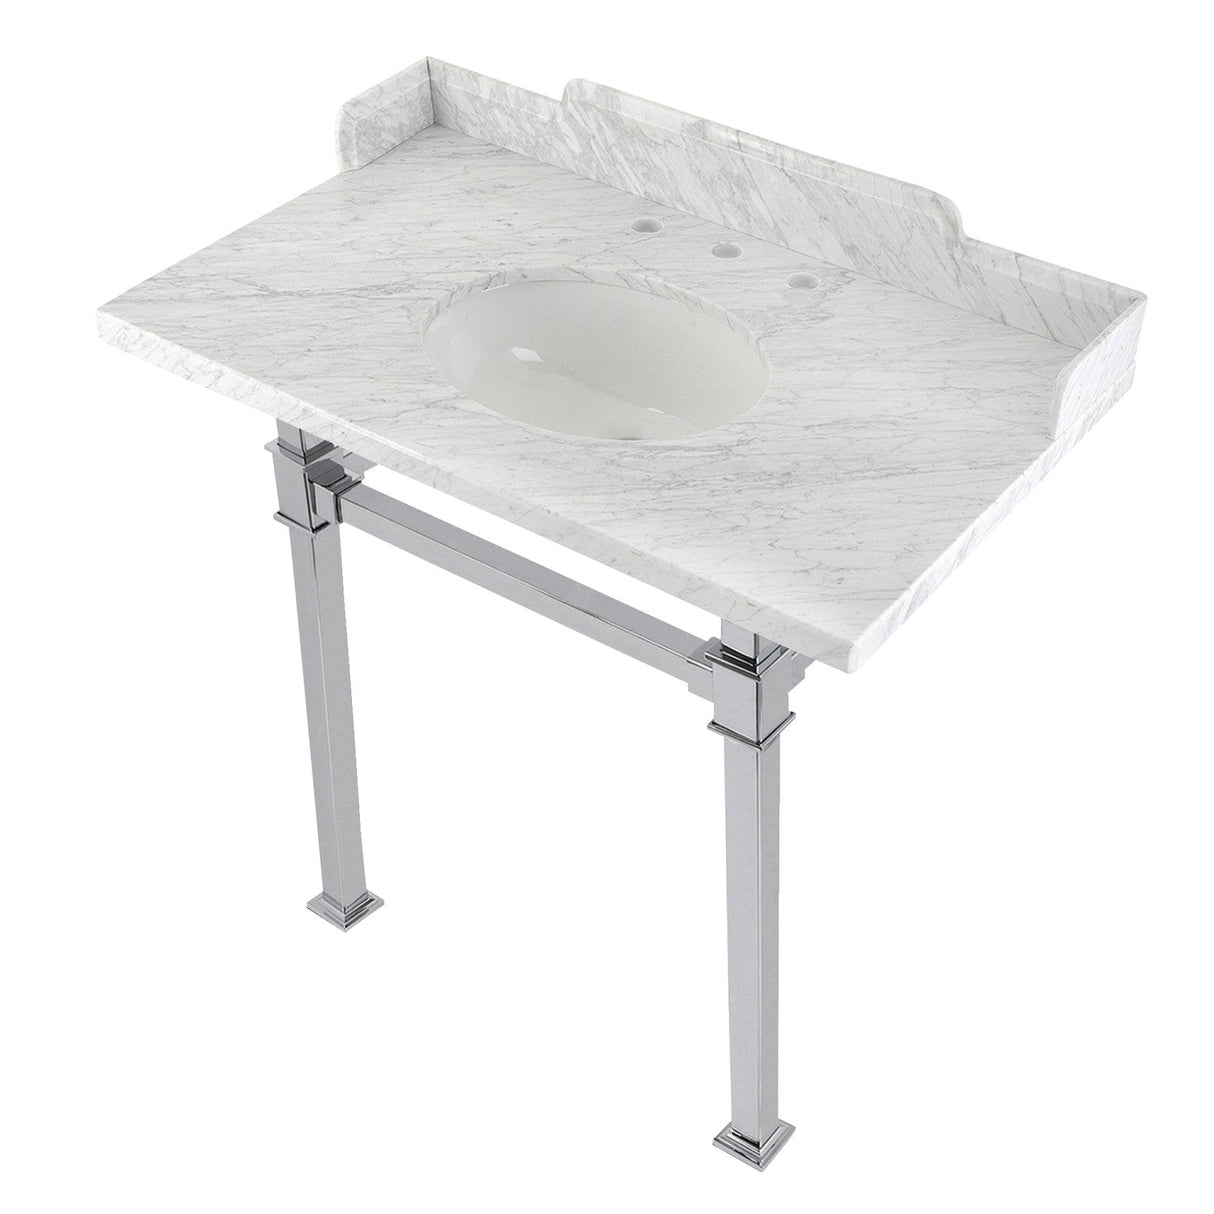 Fauceture LMS36MOQ1 36-Inch Carrara Marble Console Sink with Stainless Steel Legs, Marble White/Polished Chrome